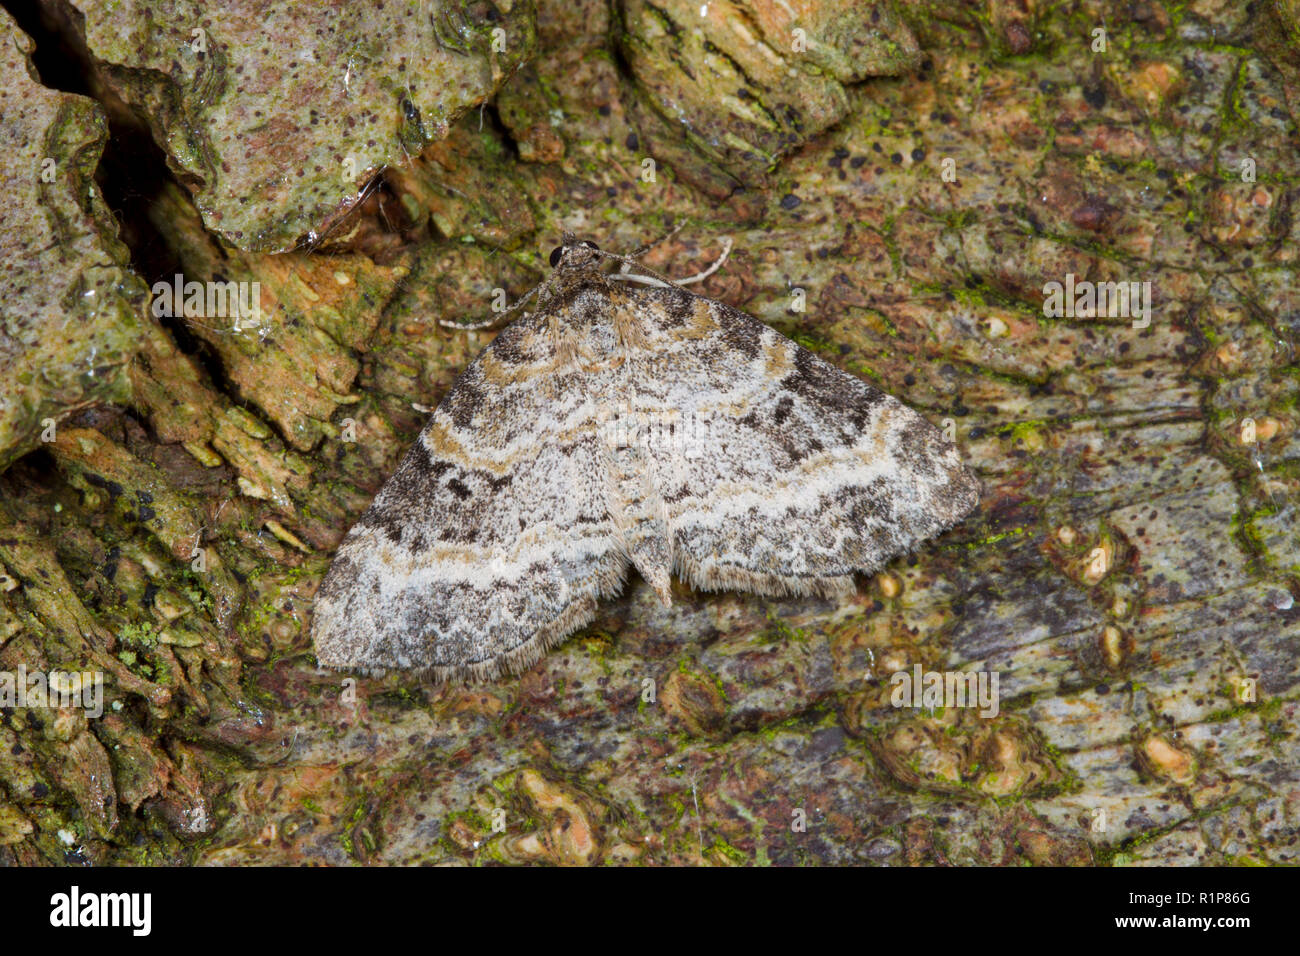 Small Seraphim (Pterapherapteryx sexalata) adult moth resting on the bark of a Beech tree. Powys, Wales. May. Stock Photo